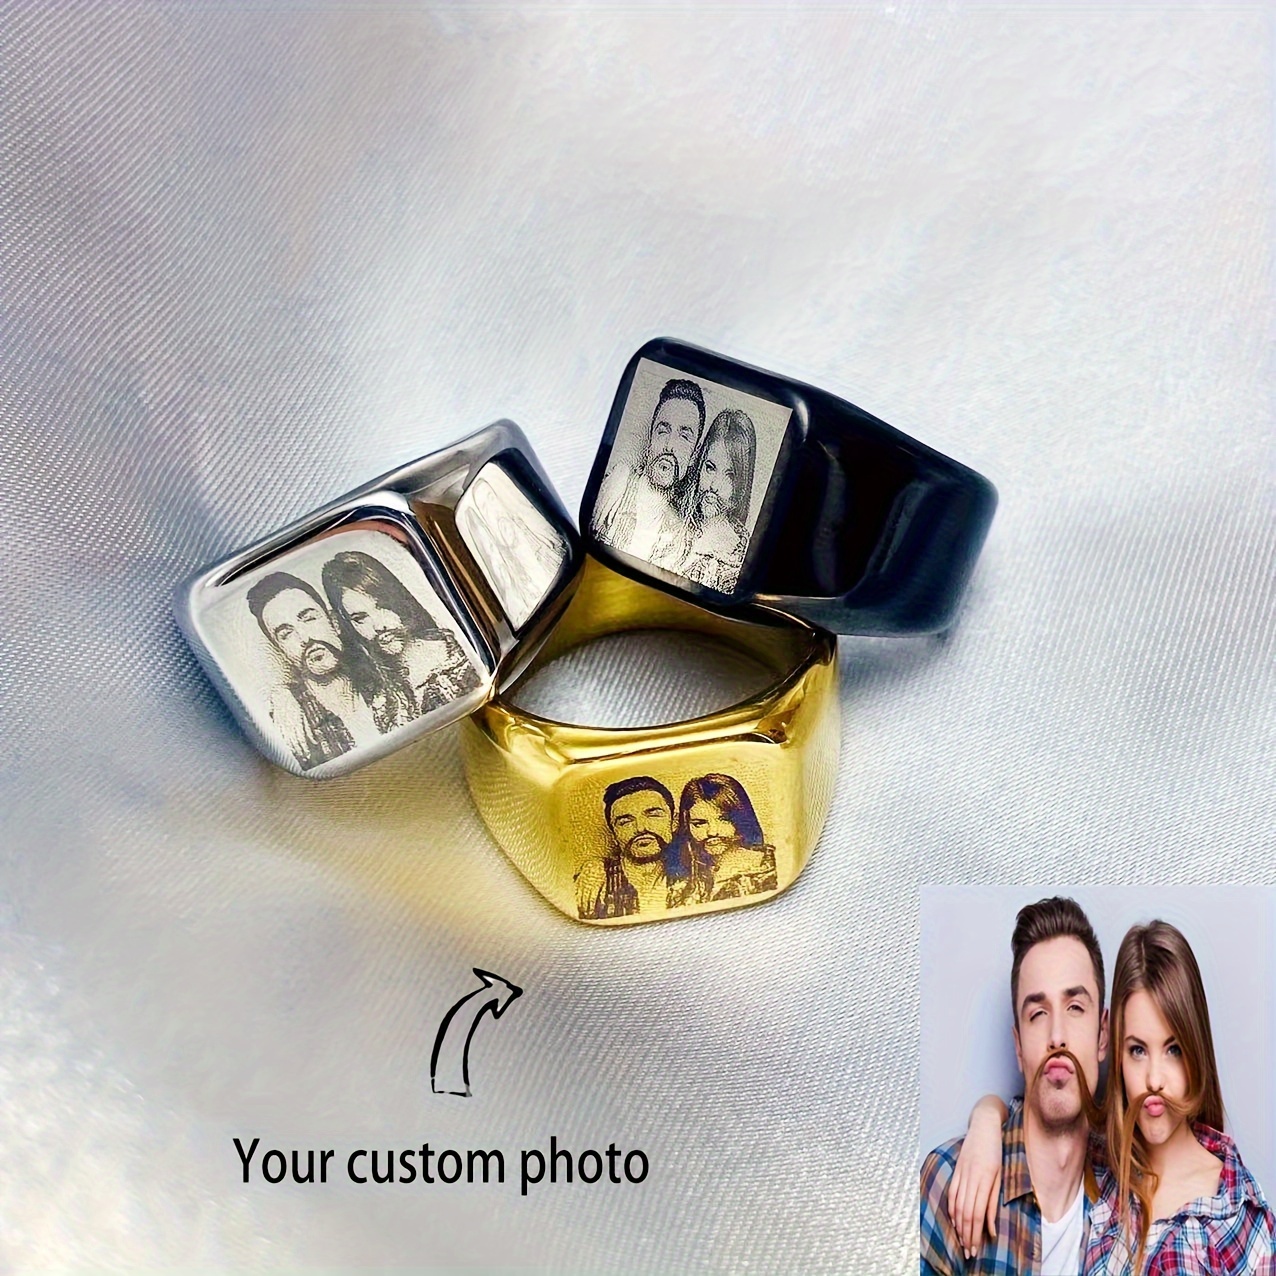 

Custom Photo Stainless Steel Ring - Personalized Men's & Women's Fashion Jewelry, Perfect Gift For Family & Friends